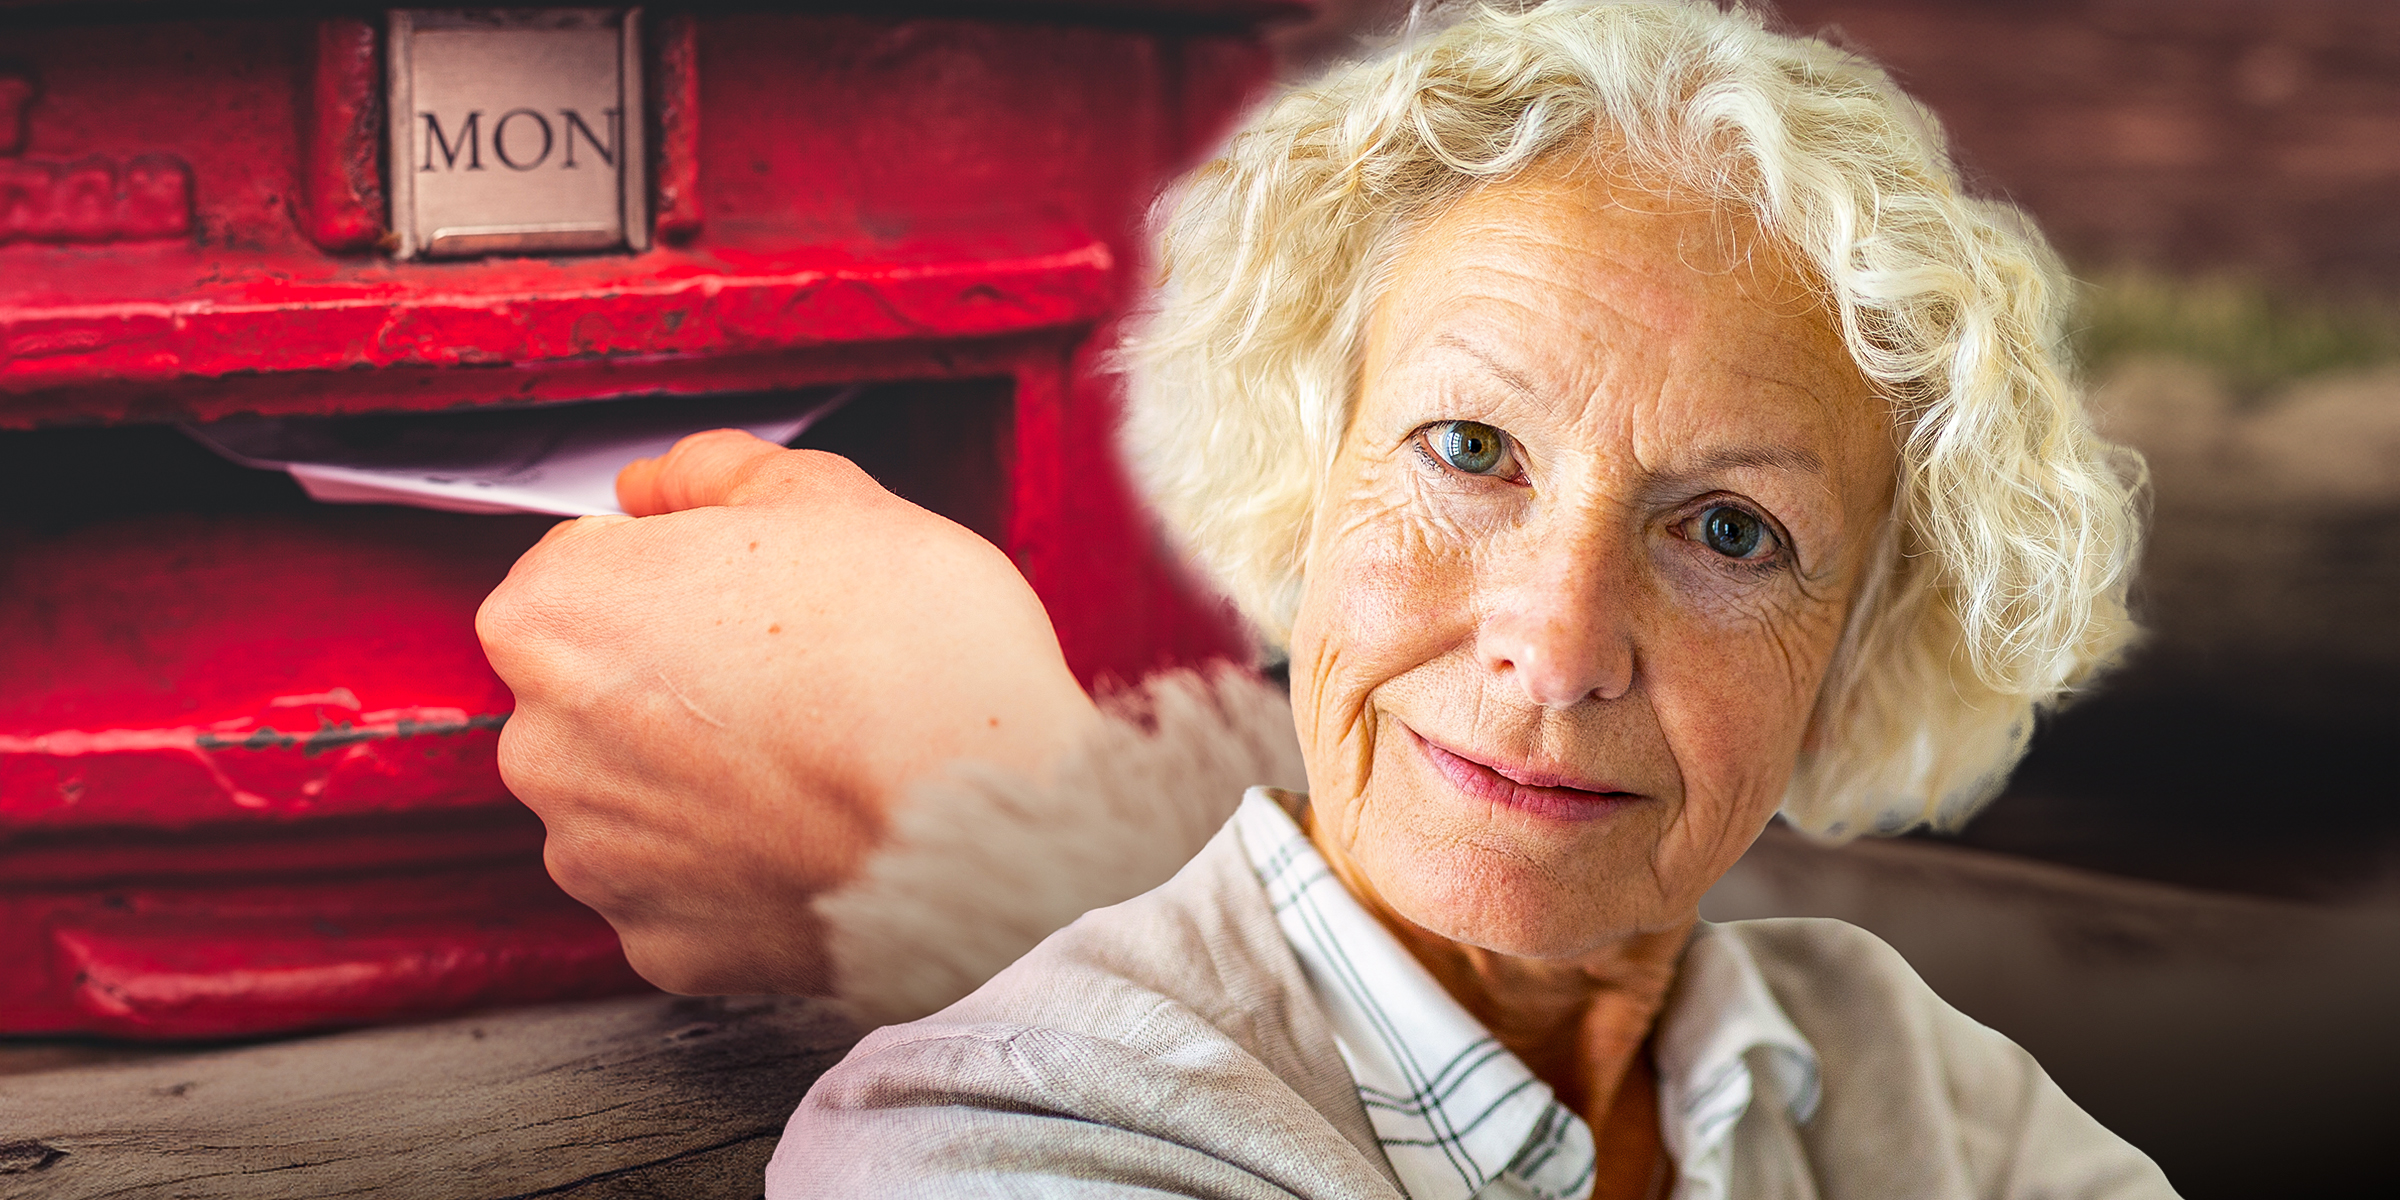 A person putting a letter in a mailbox | A smirking older woman | Source: Shutterstock